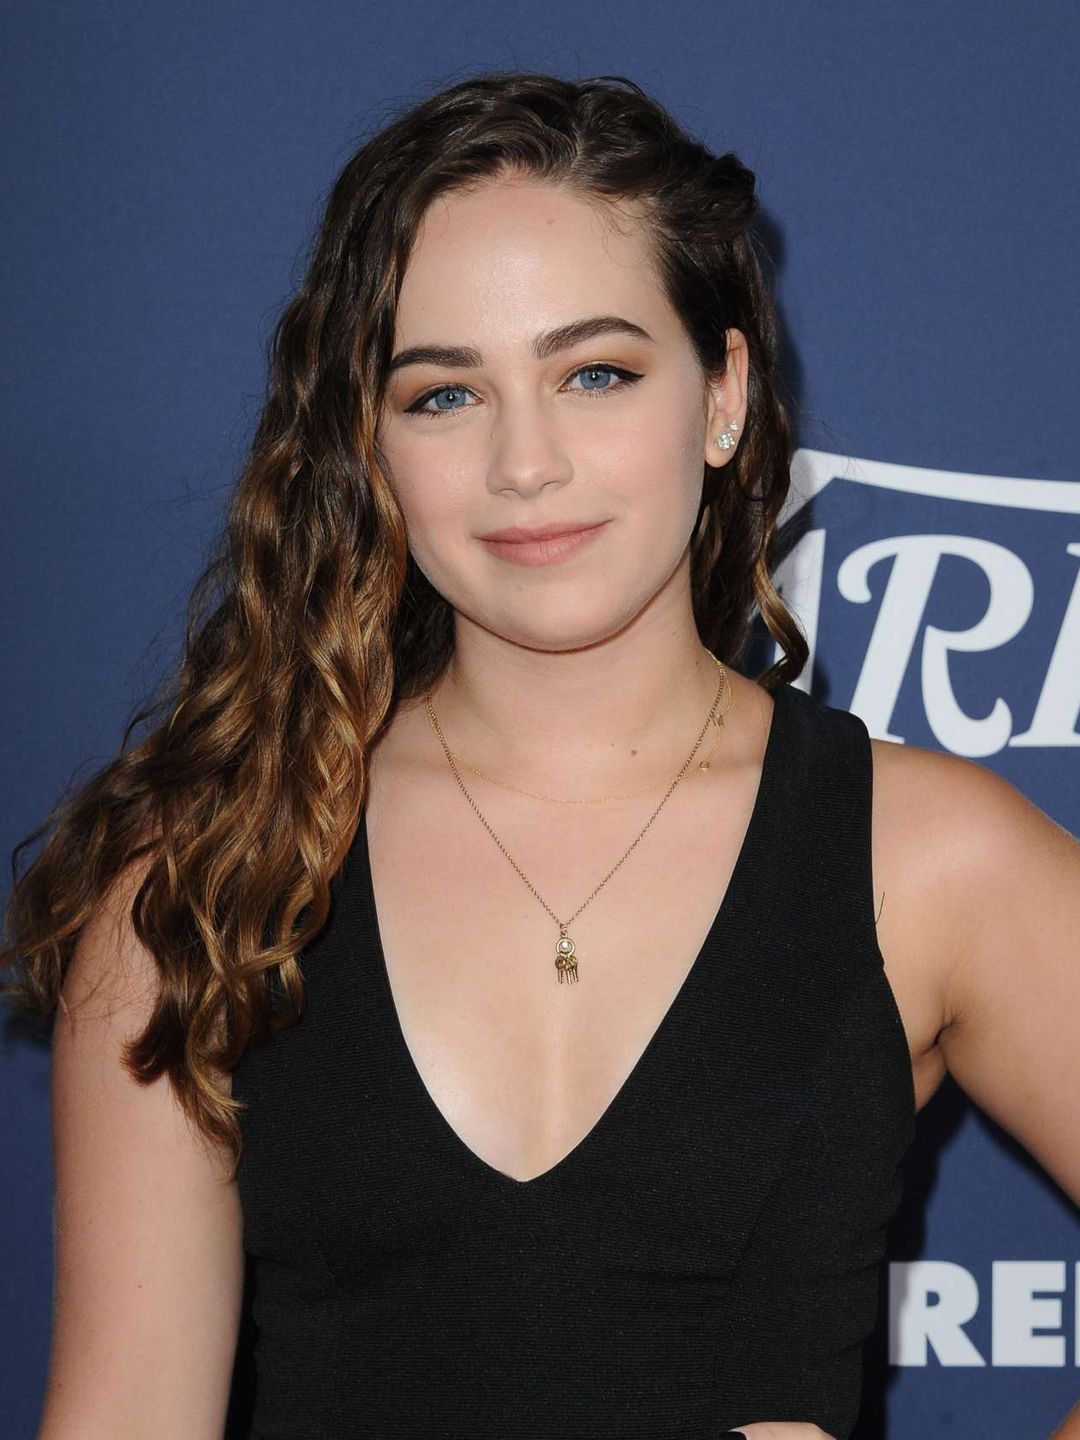 Mary Mouser who are her parents